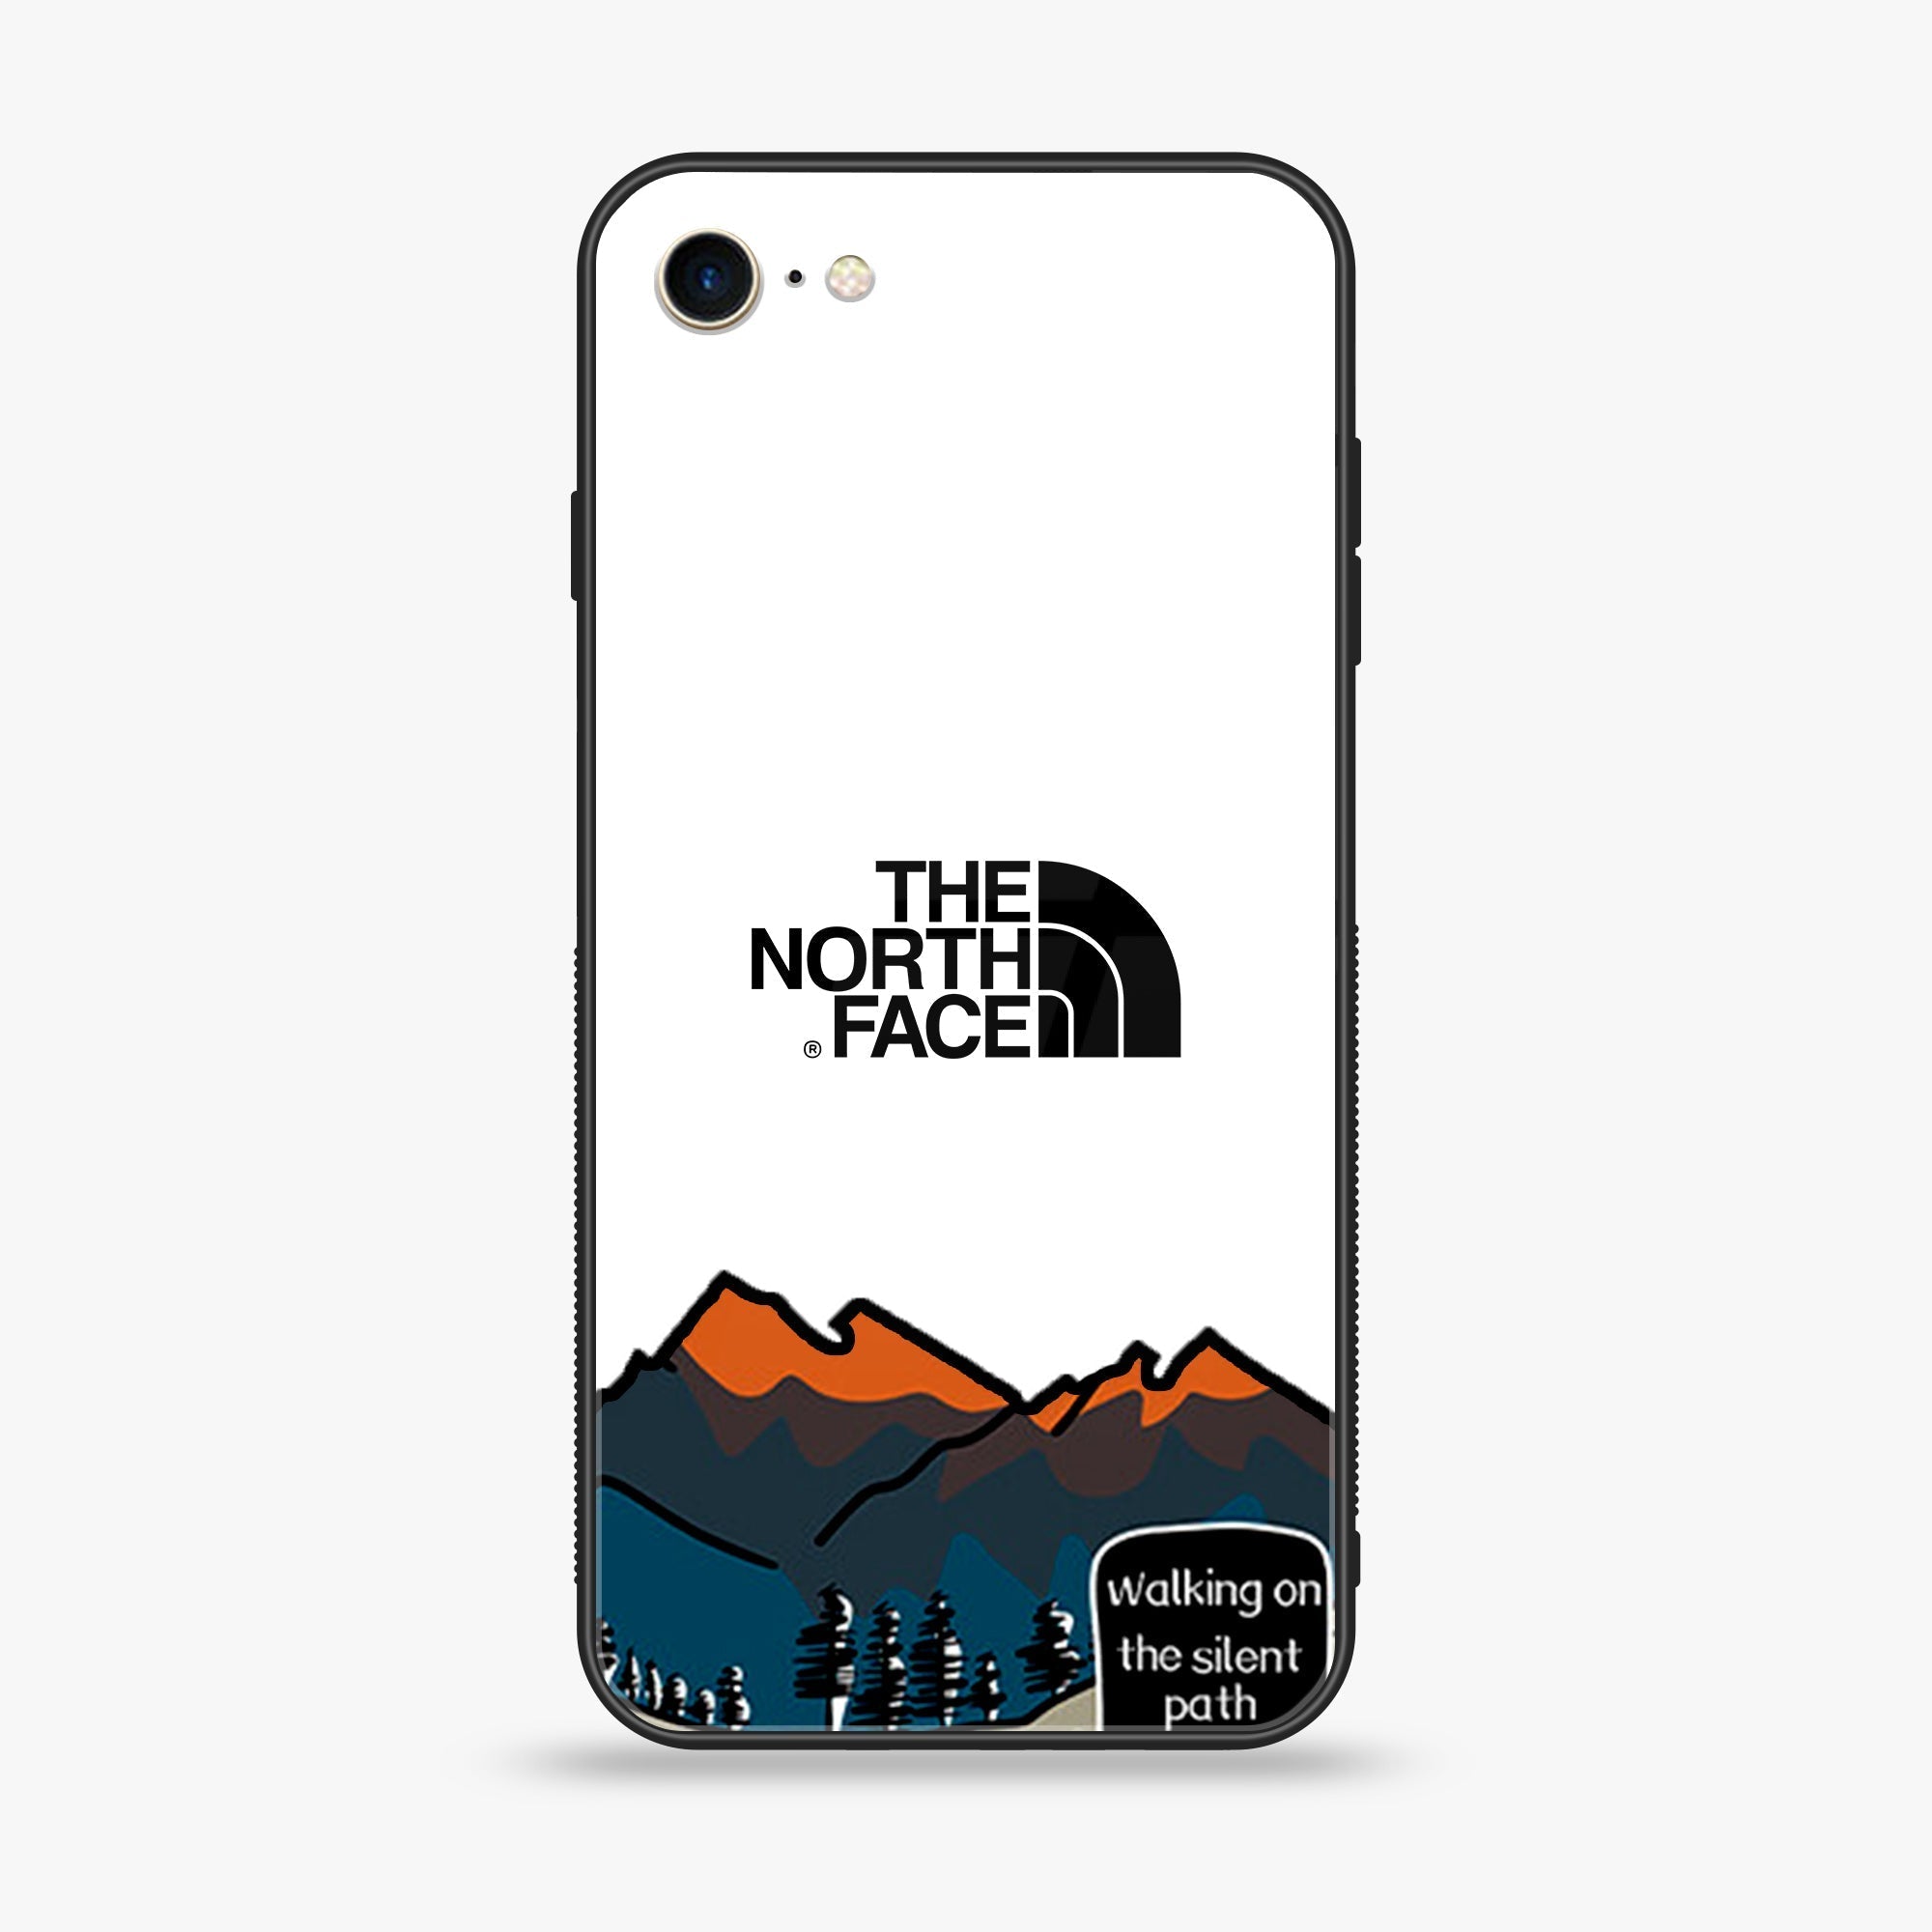 iPhone SE 2022 - The North Face Series - Premium Printed Glass soft Bumper shock Proof Case